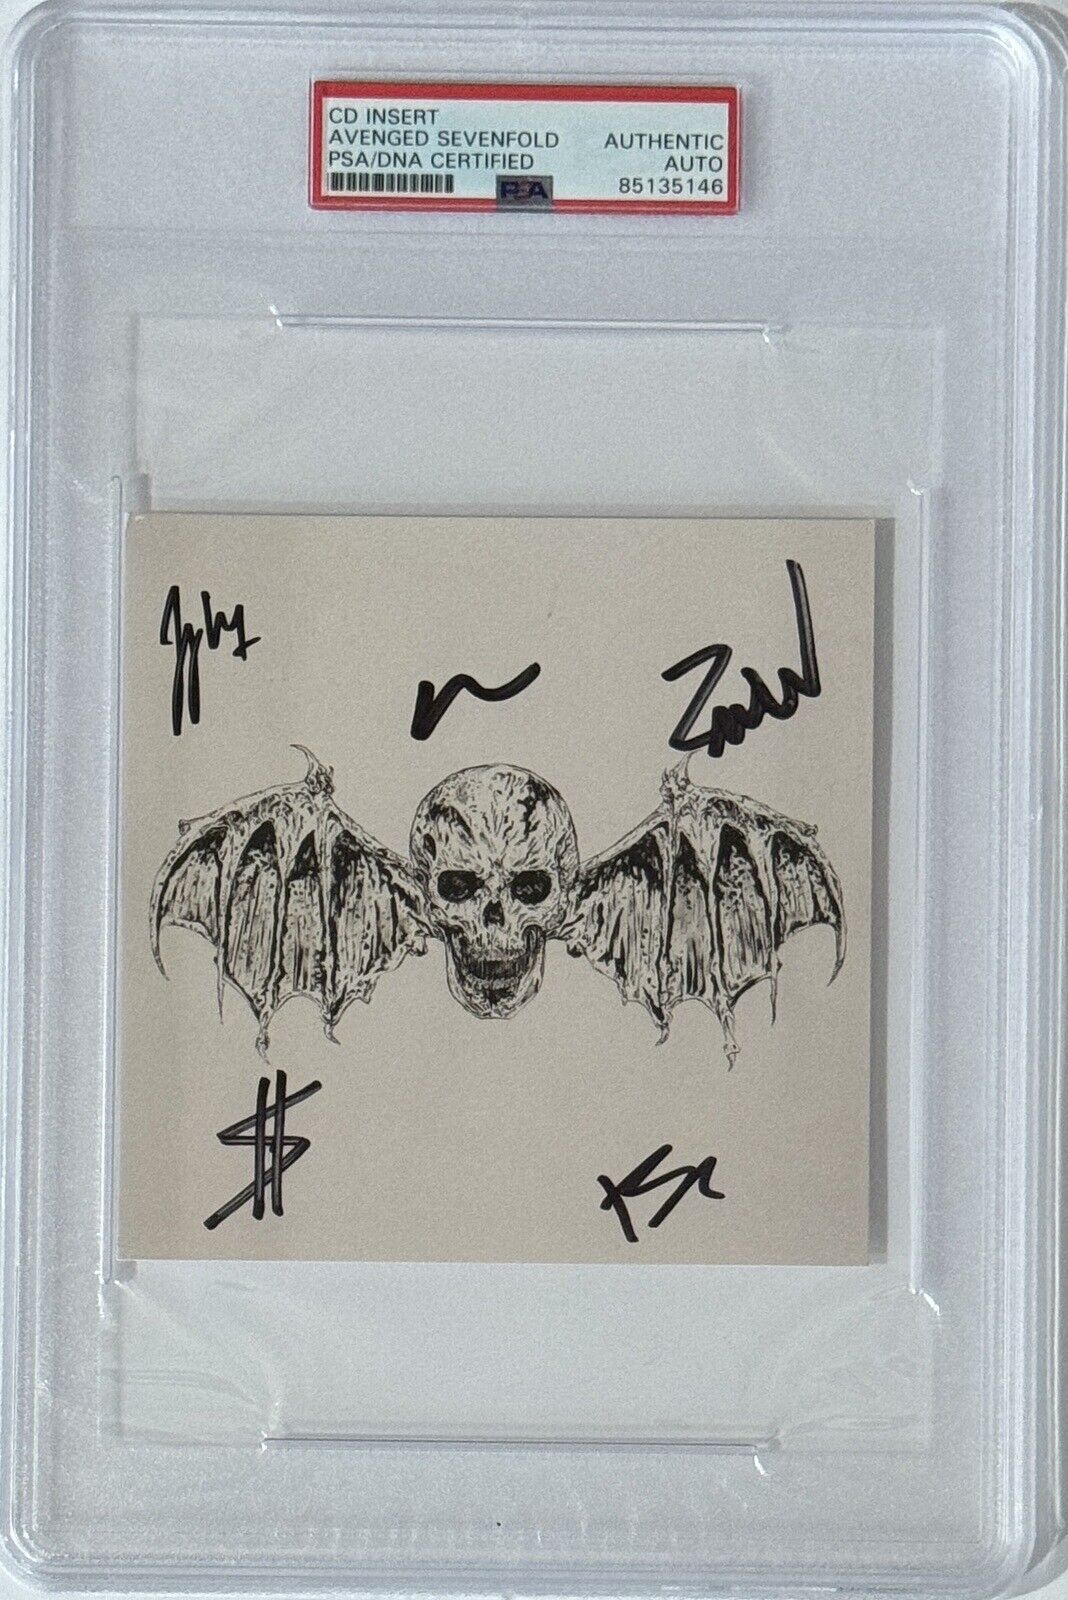 ENTIRE BAND SIGNED Avenged Sevenfold Autographed CD Cover Art Card PSA DNA COA